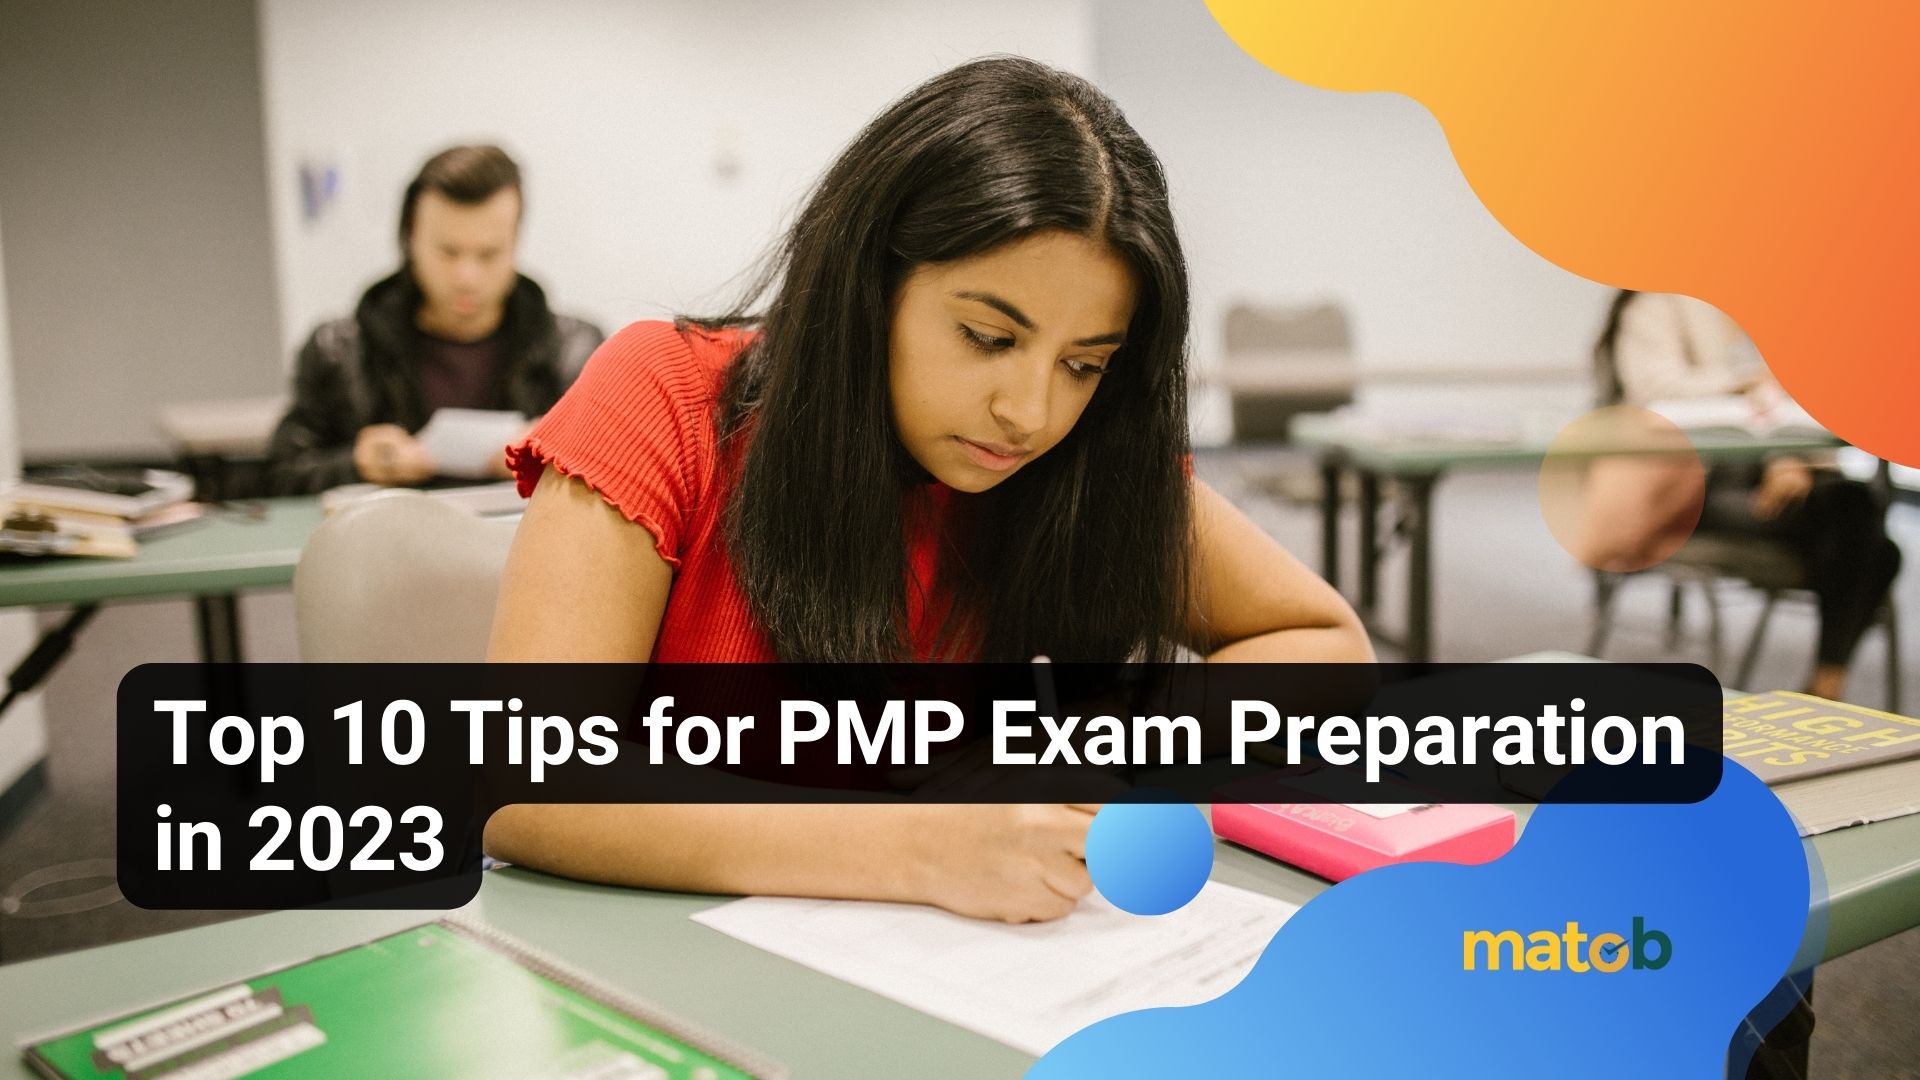 Top 10 Tips for PMP Exam Preparation in 2023